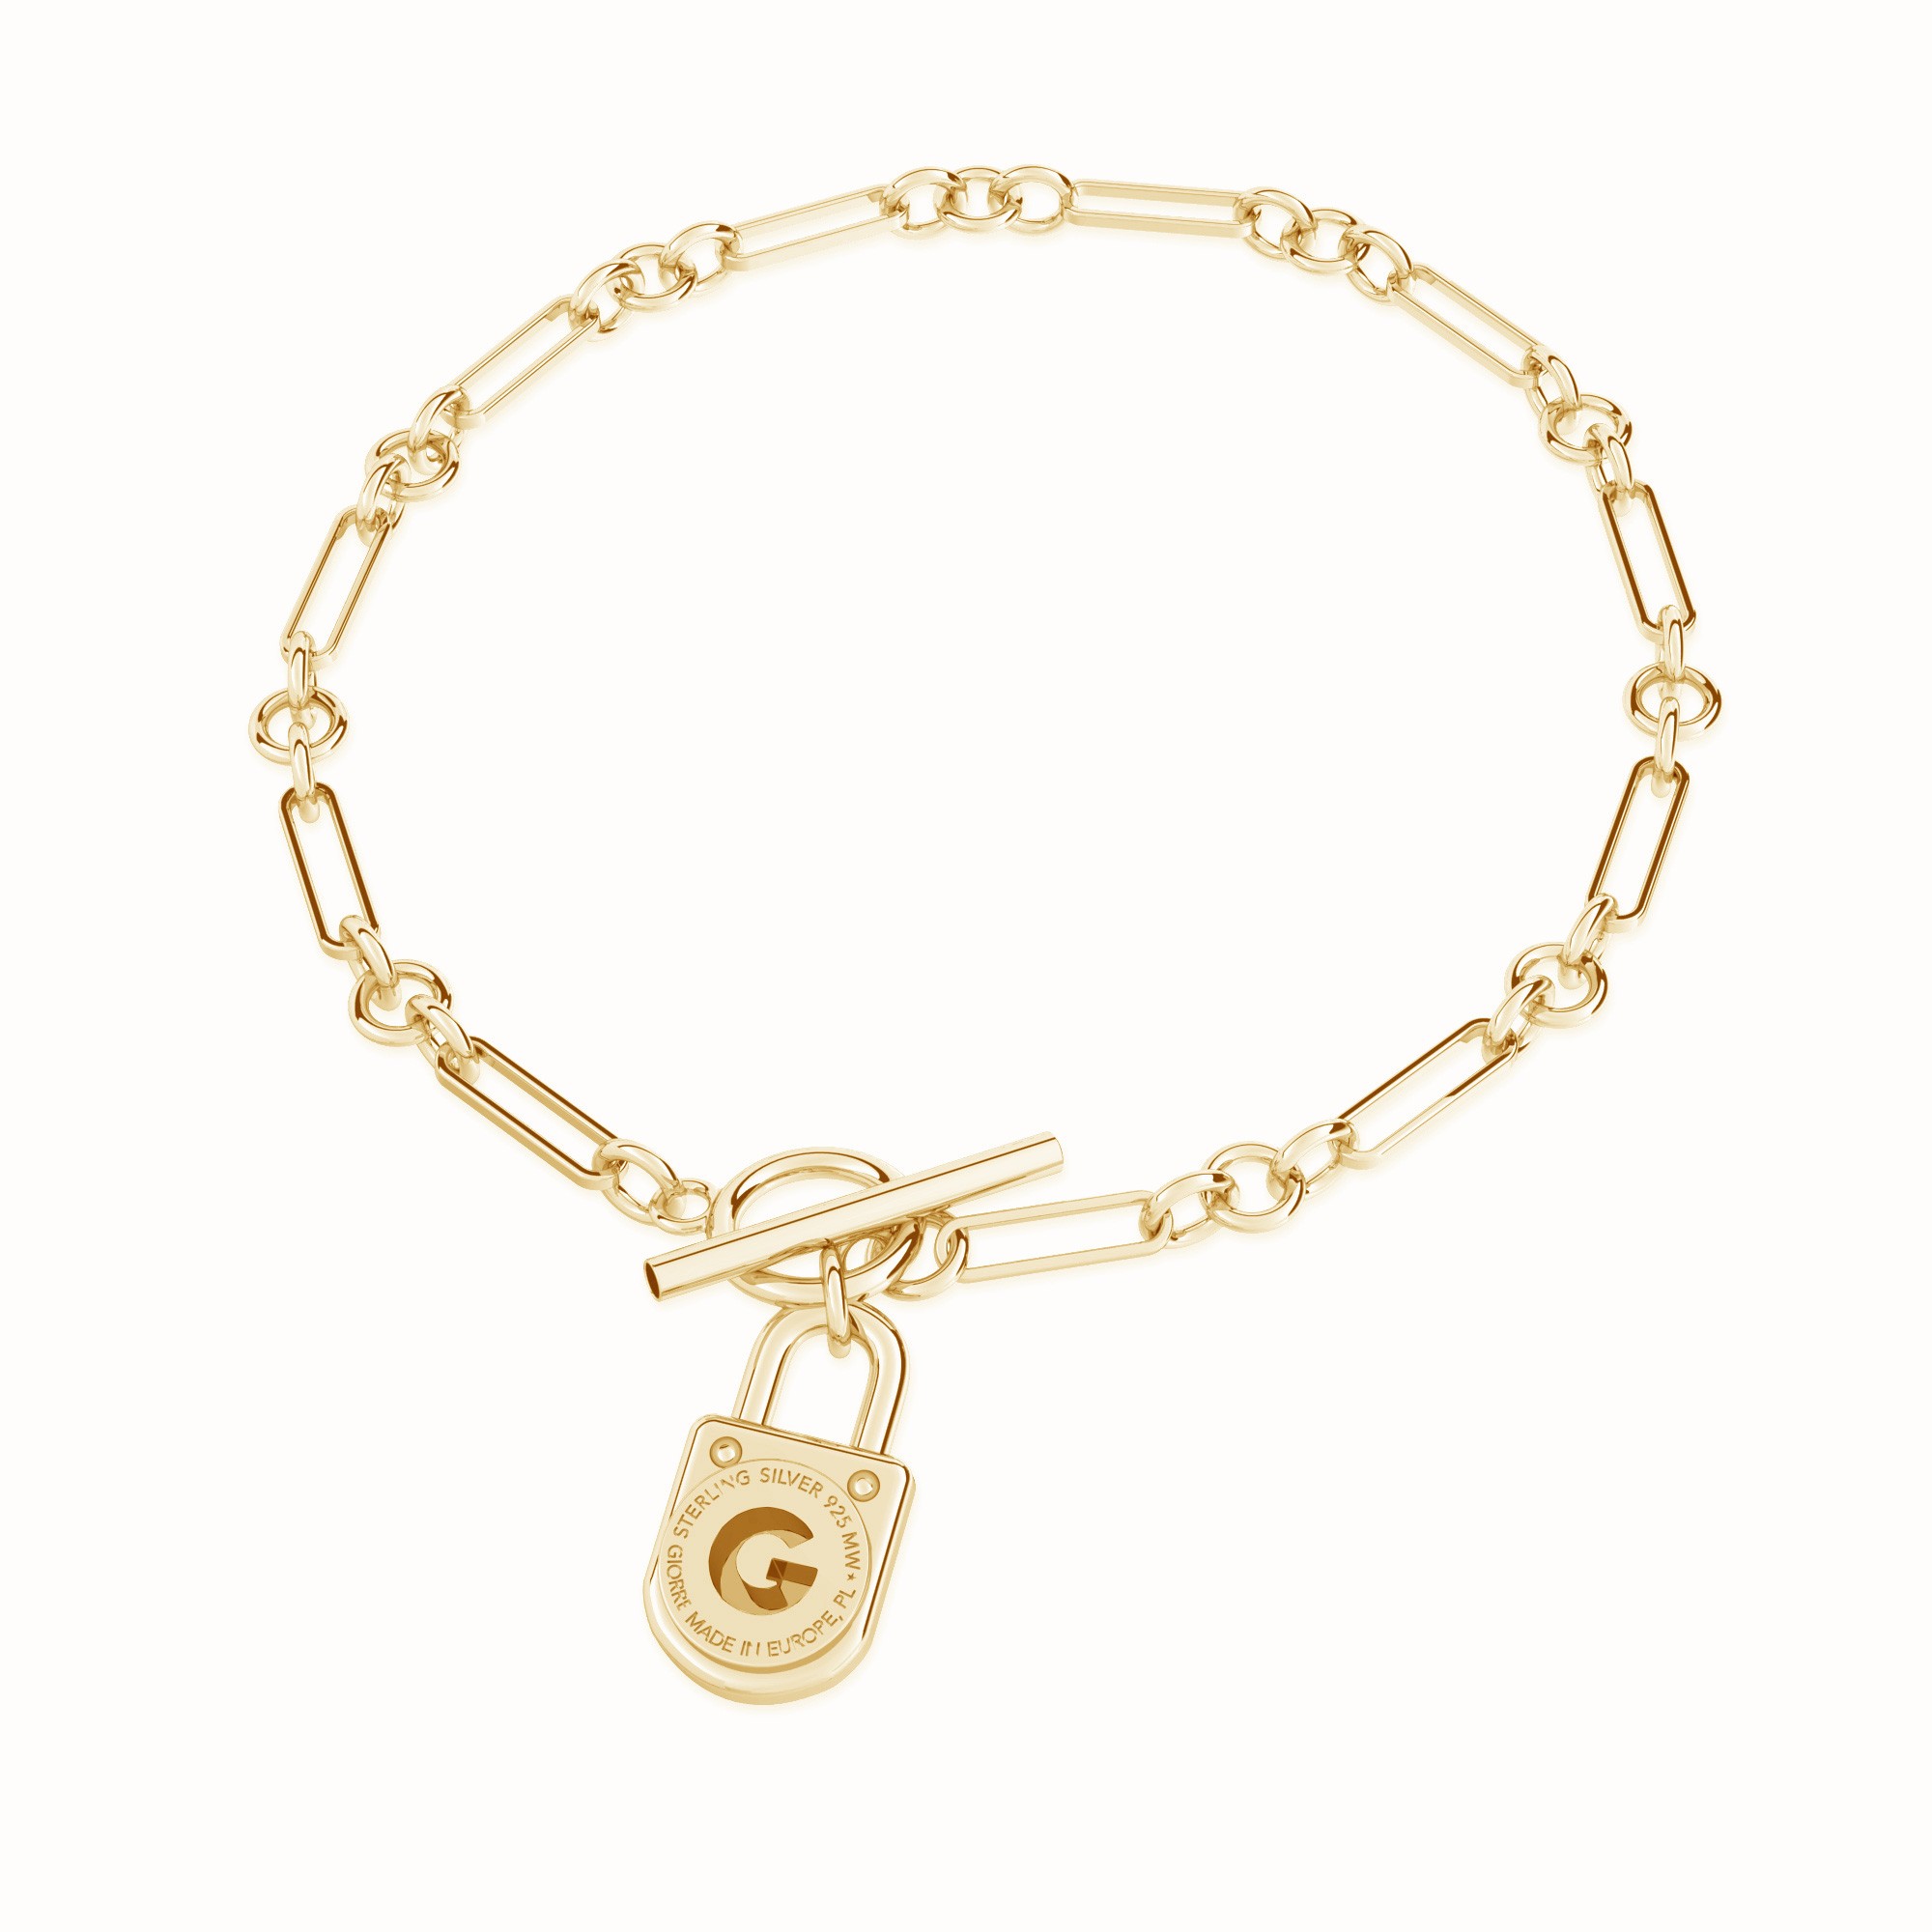 Choker with Giorre padlock, sterling silver 925